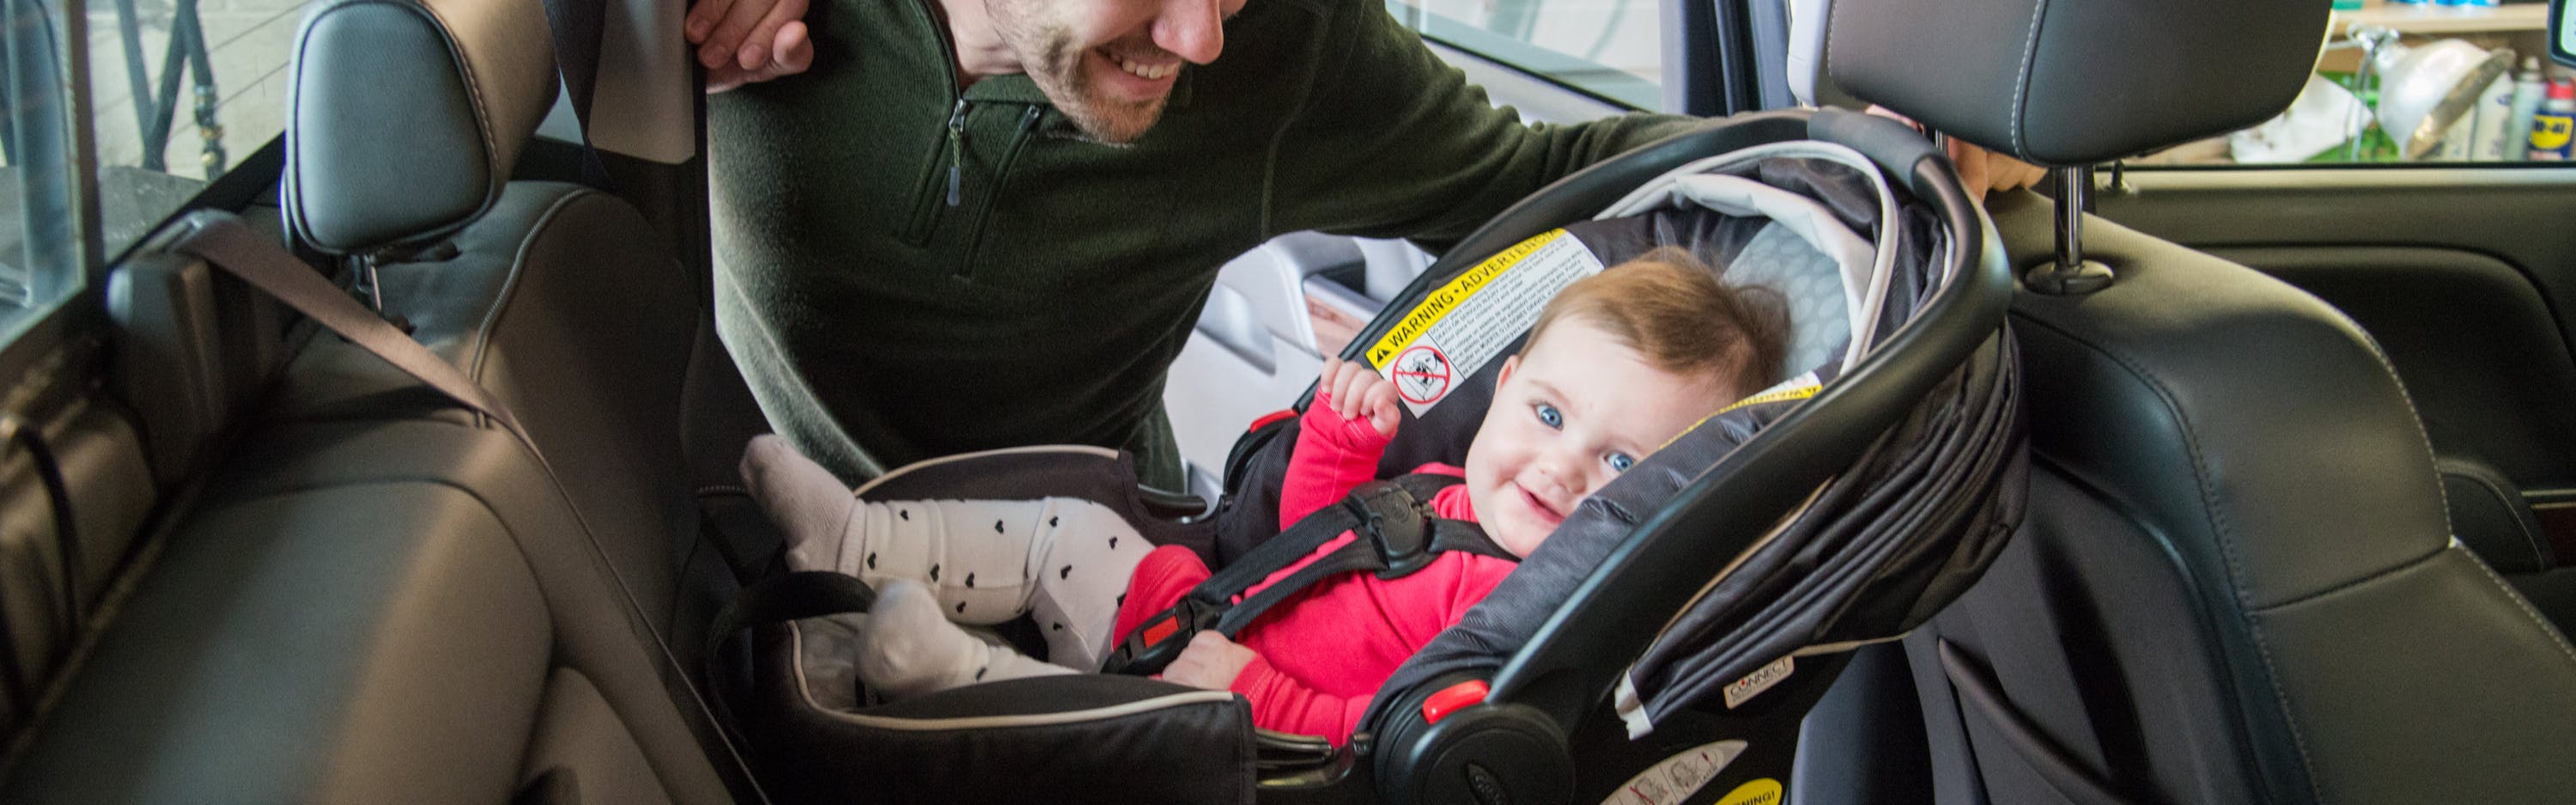 Car seats, cribs, and more: Safety tips for top infant products